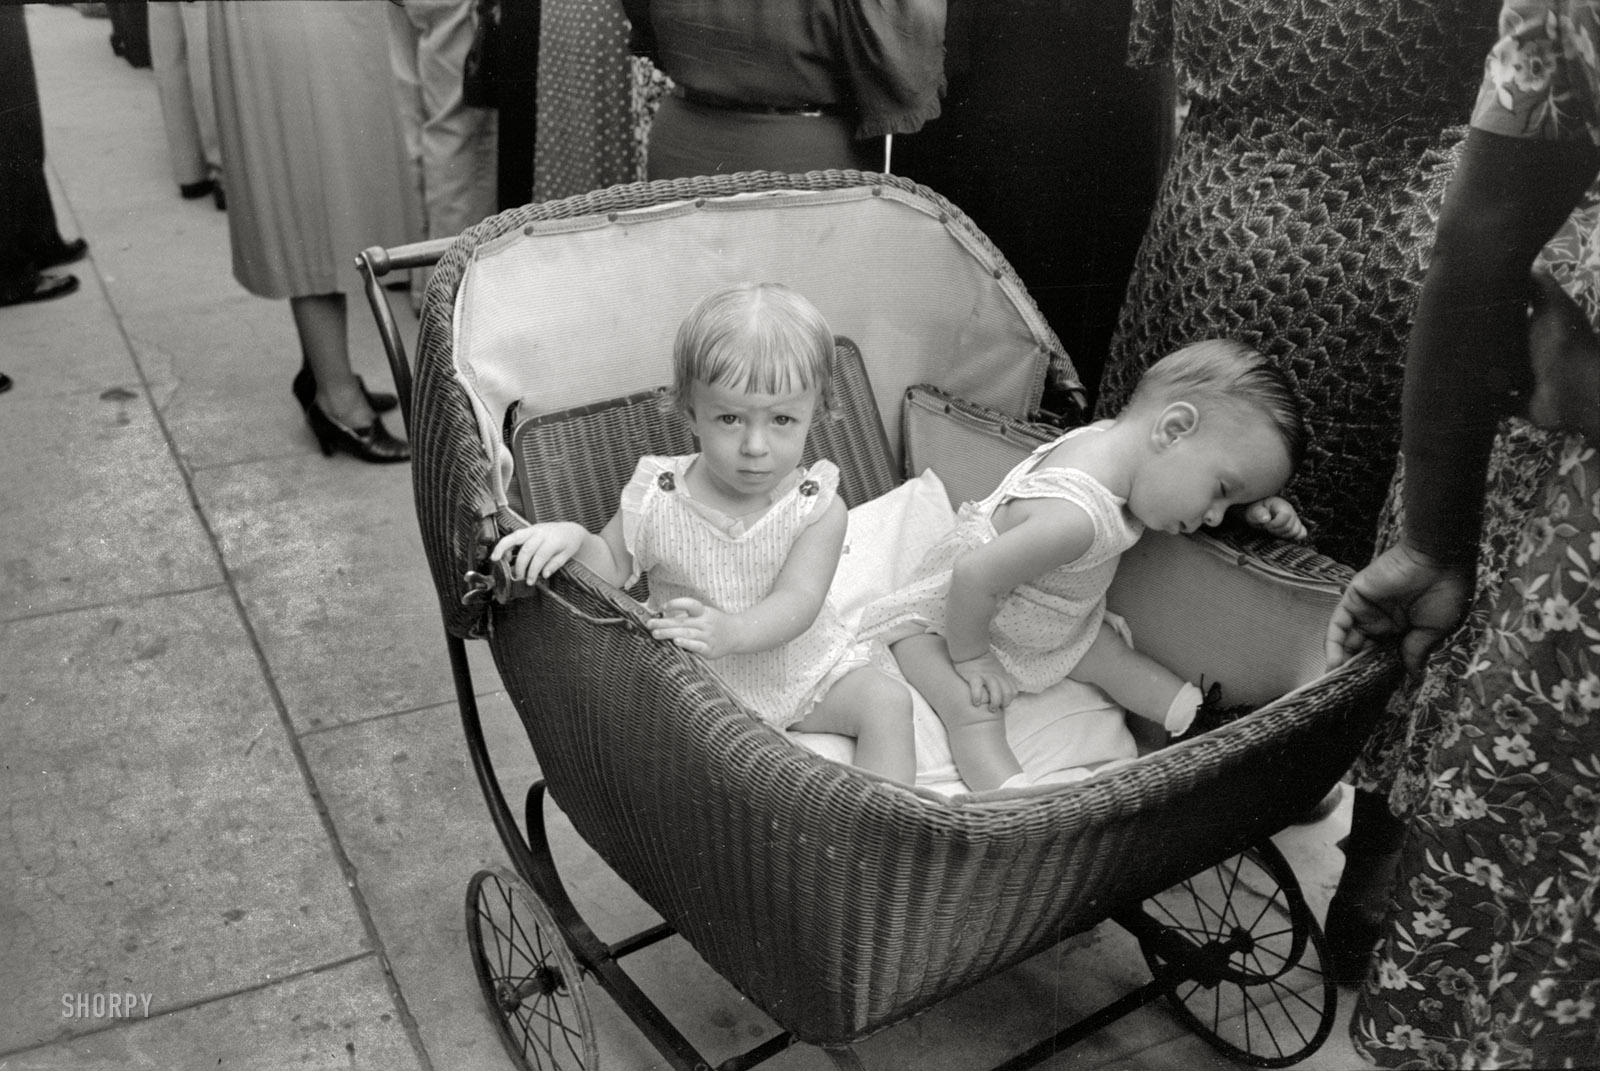 October 1938. Crowley, Louisiana. "Children in buggy at National Rice Festival." 35mm negative by Russell Lee, Farm Security Administration. View full size.